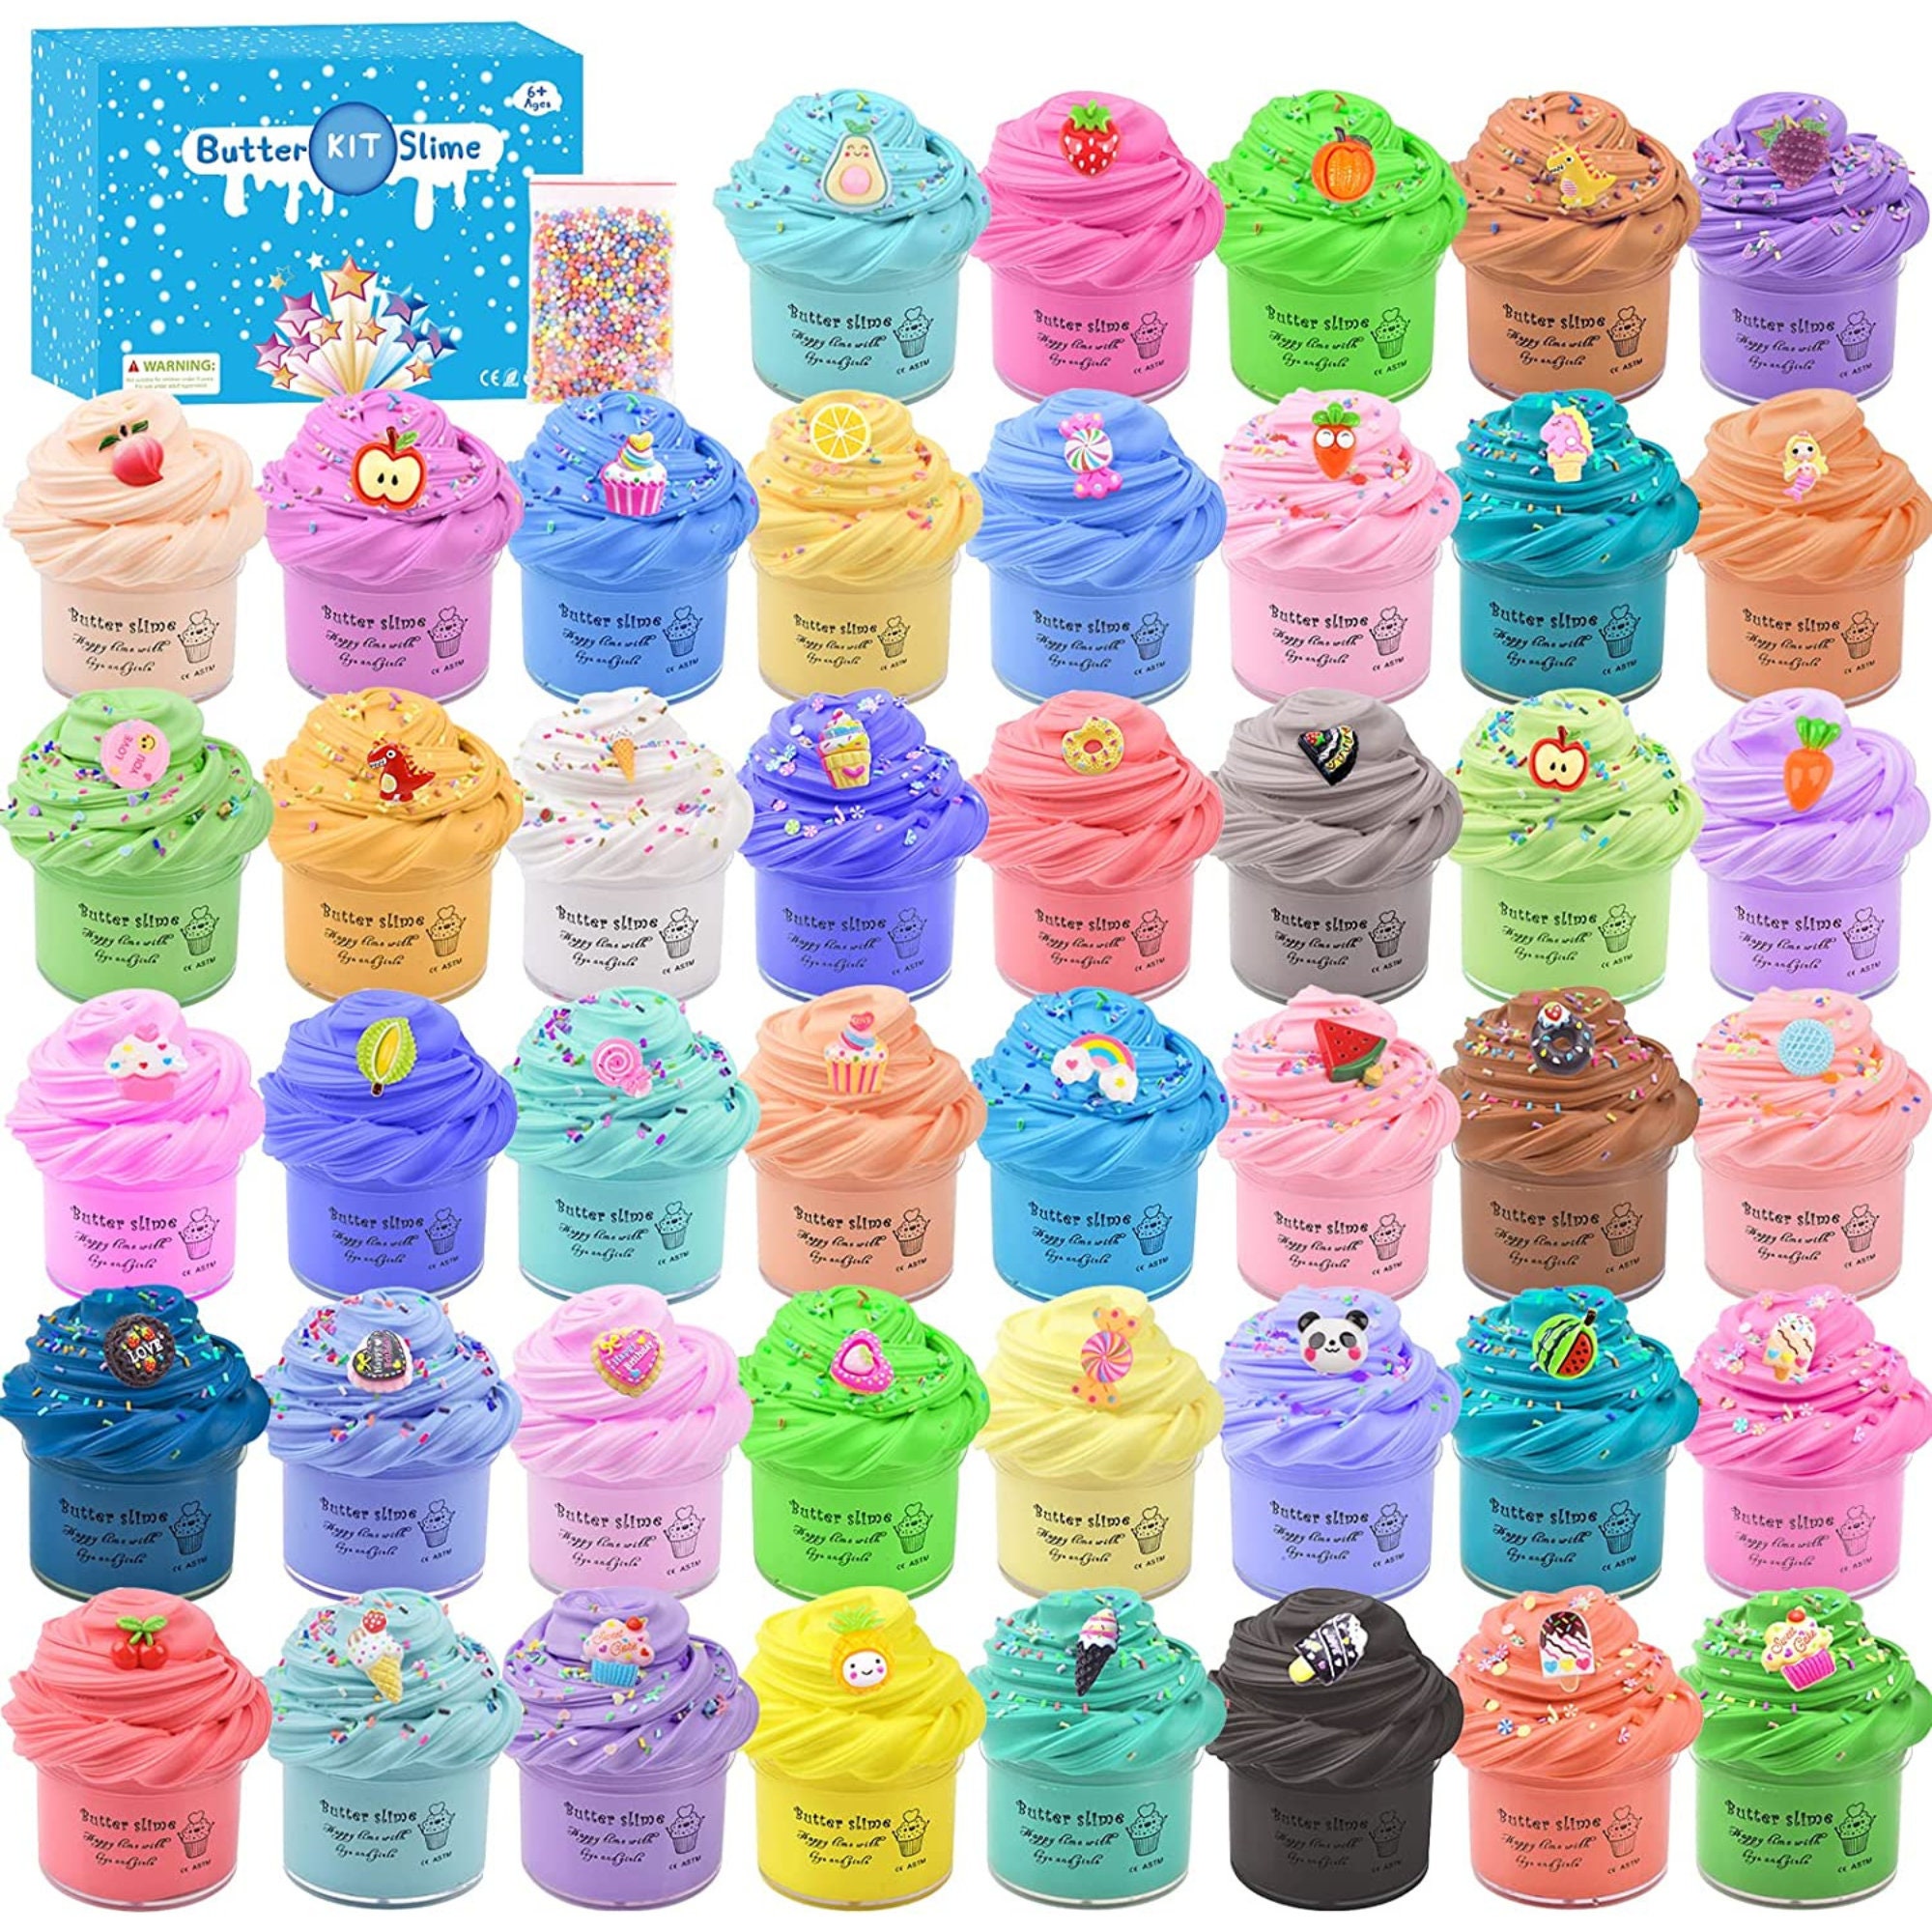 Mini Butter Slime kit 40 Pack, with Unicorn, Candy, Fruit, ice Cream Slime  Accessories etc, Soft and Non-Sticky, Cute Educational Toy for Kids, for  Girls Boys Kids Party Stress Relief Toys 